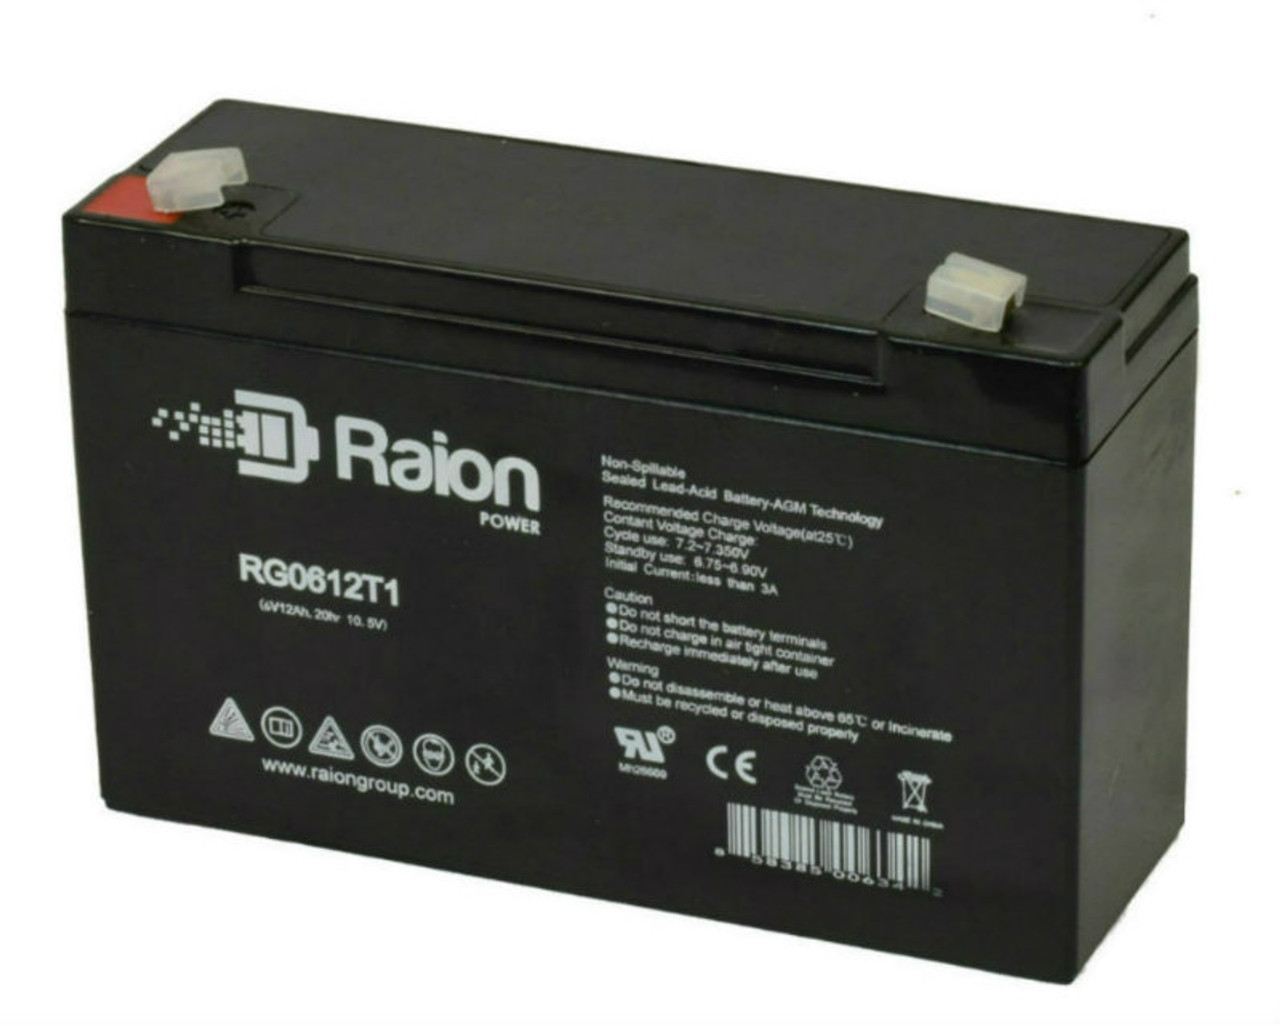 Raion Power RG06120T1 Replacement 6V 12Ah Emergency Light Battery for Chloride TMF50